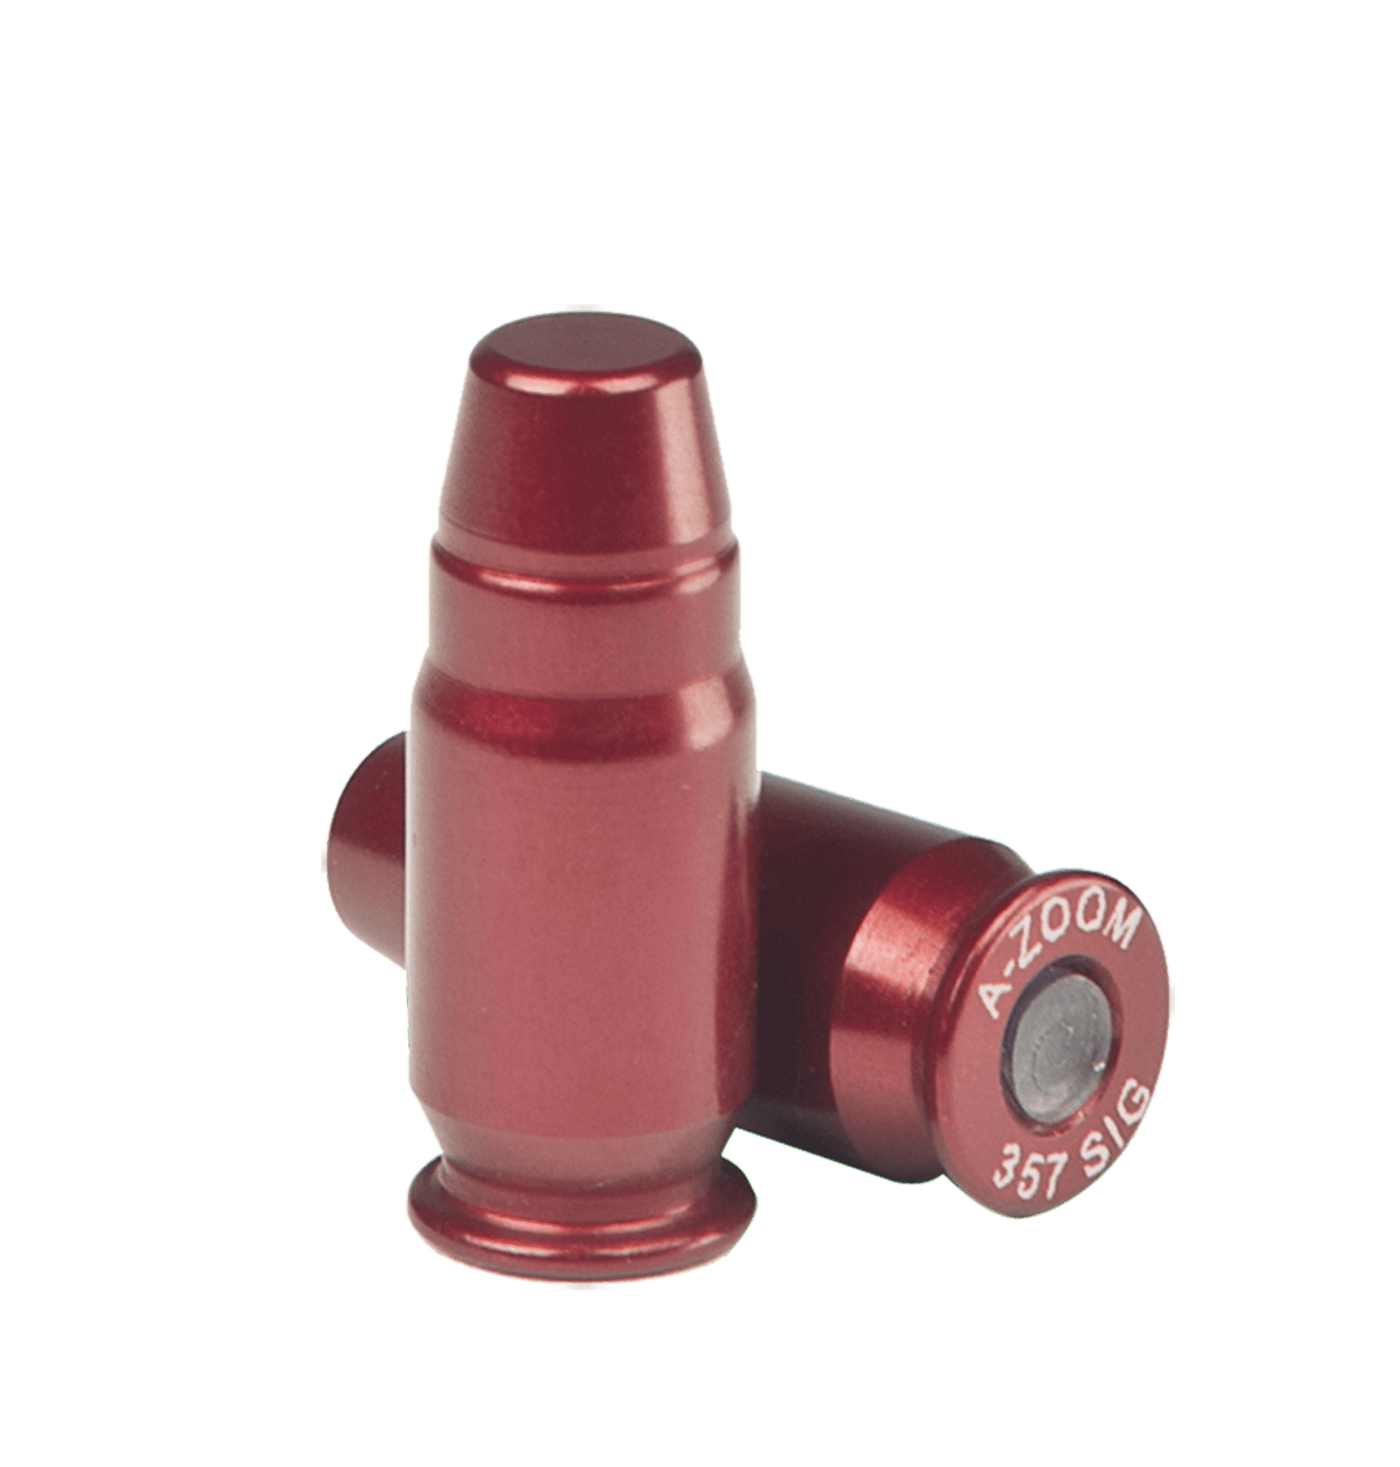 A-Zoom A-zoom Metal Snap Cap .357sig - 5-pack Ammo